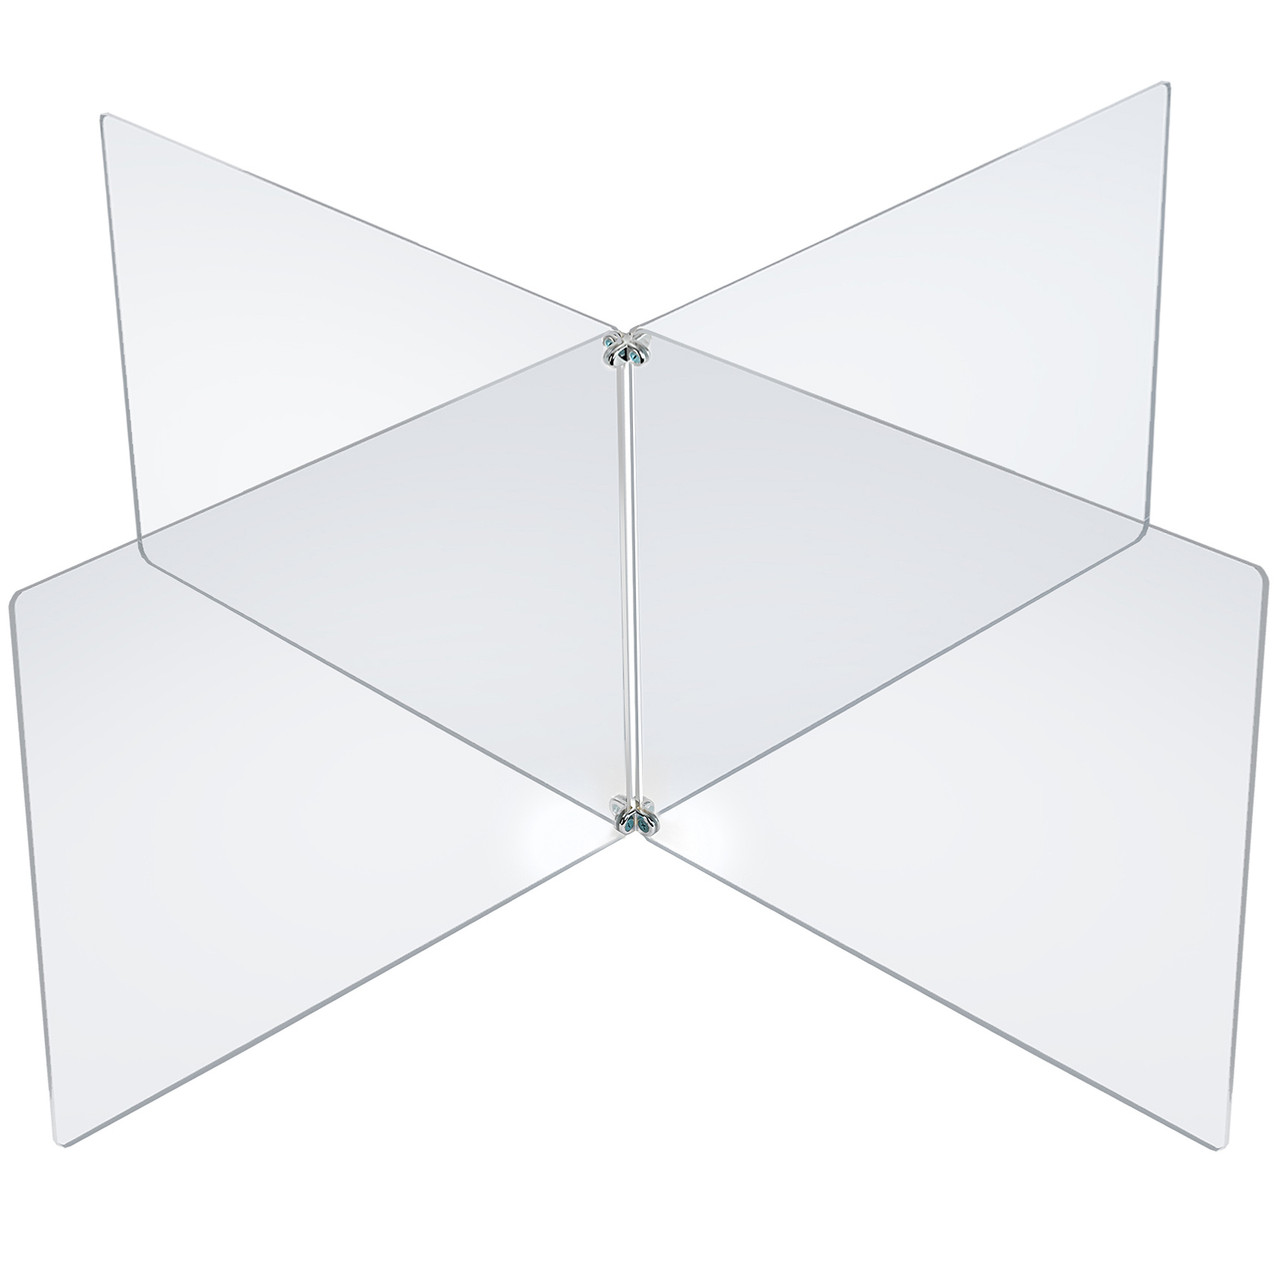 Small 28 W x 24 H Acrylic Divider